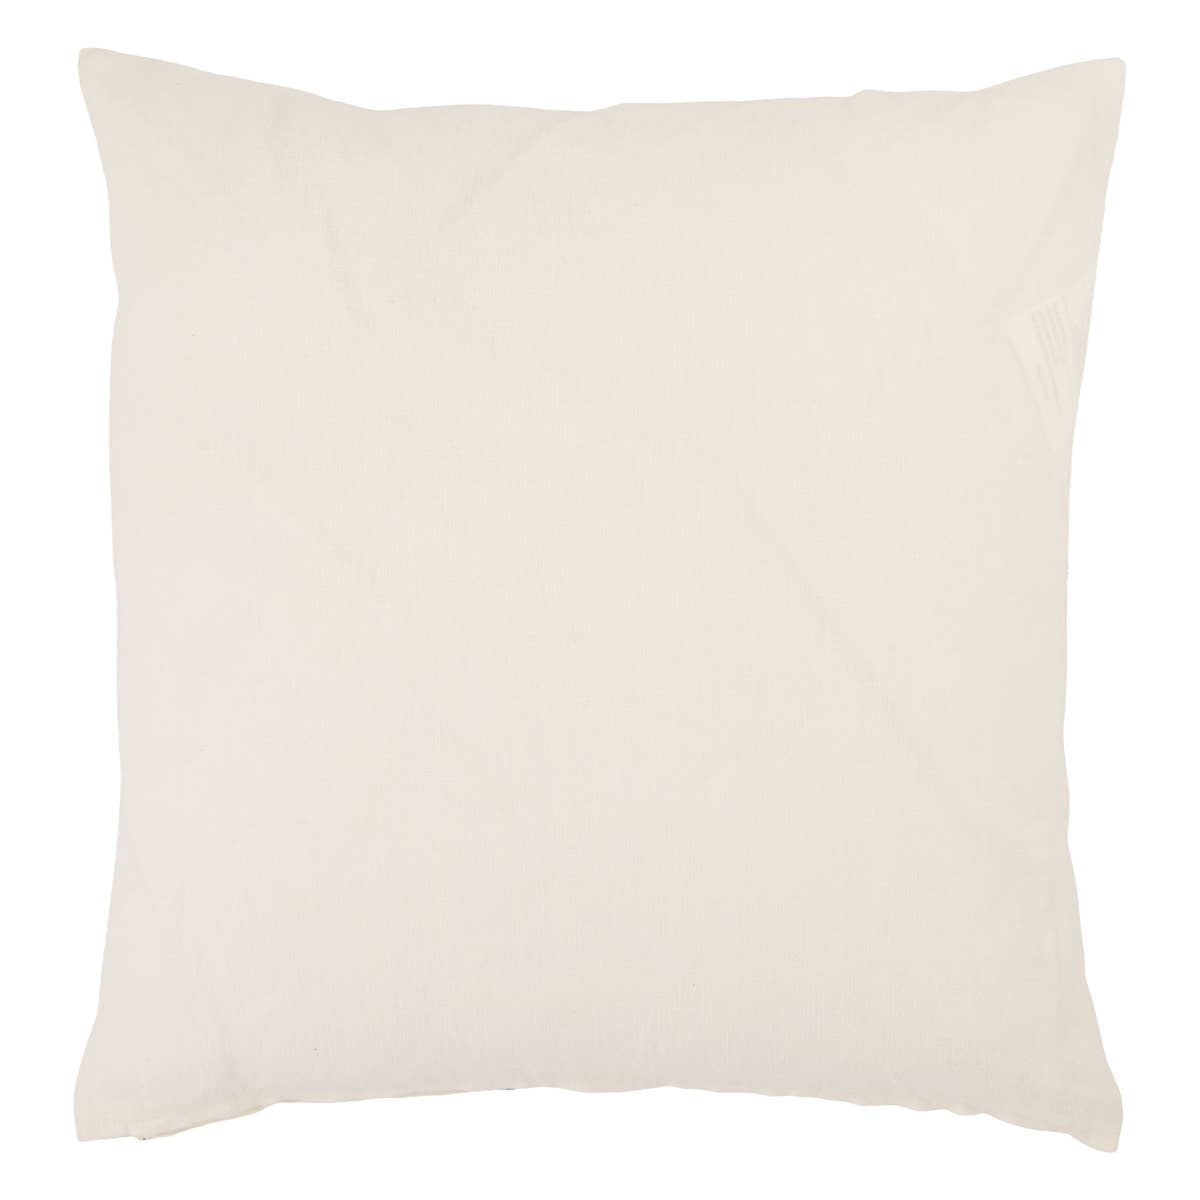 Sophisticated simplicity and relaxed neutrals define the texturally inspiring Galley Pembroke Pillow. Crafted of soft linen, the Pembroke pillow boasts a clean-lined motif and a casual colorway. A gray, crossed linear design adds visual intrigue to the elegant backdrop.  Size: 22" x 22"